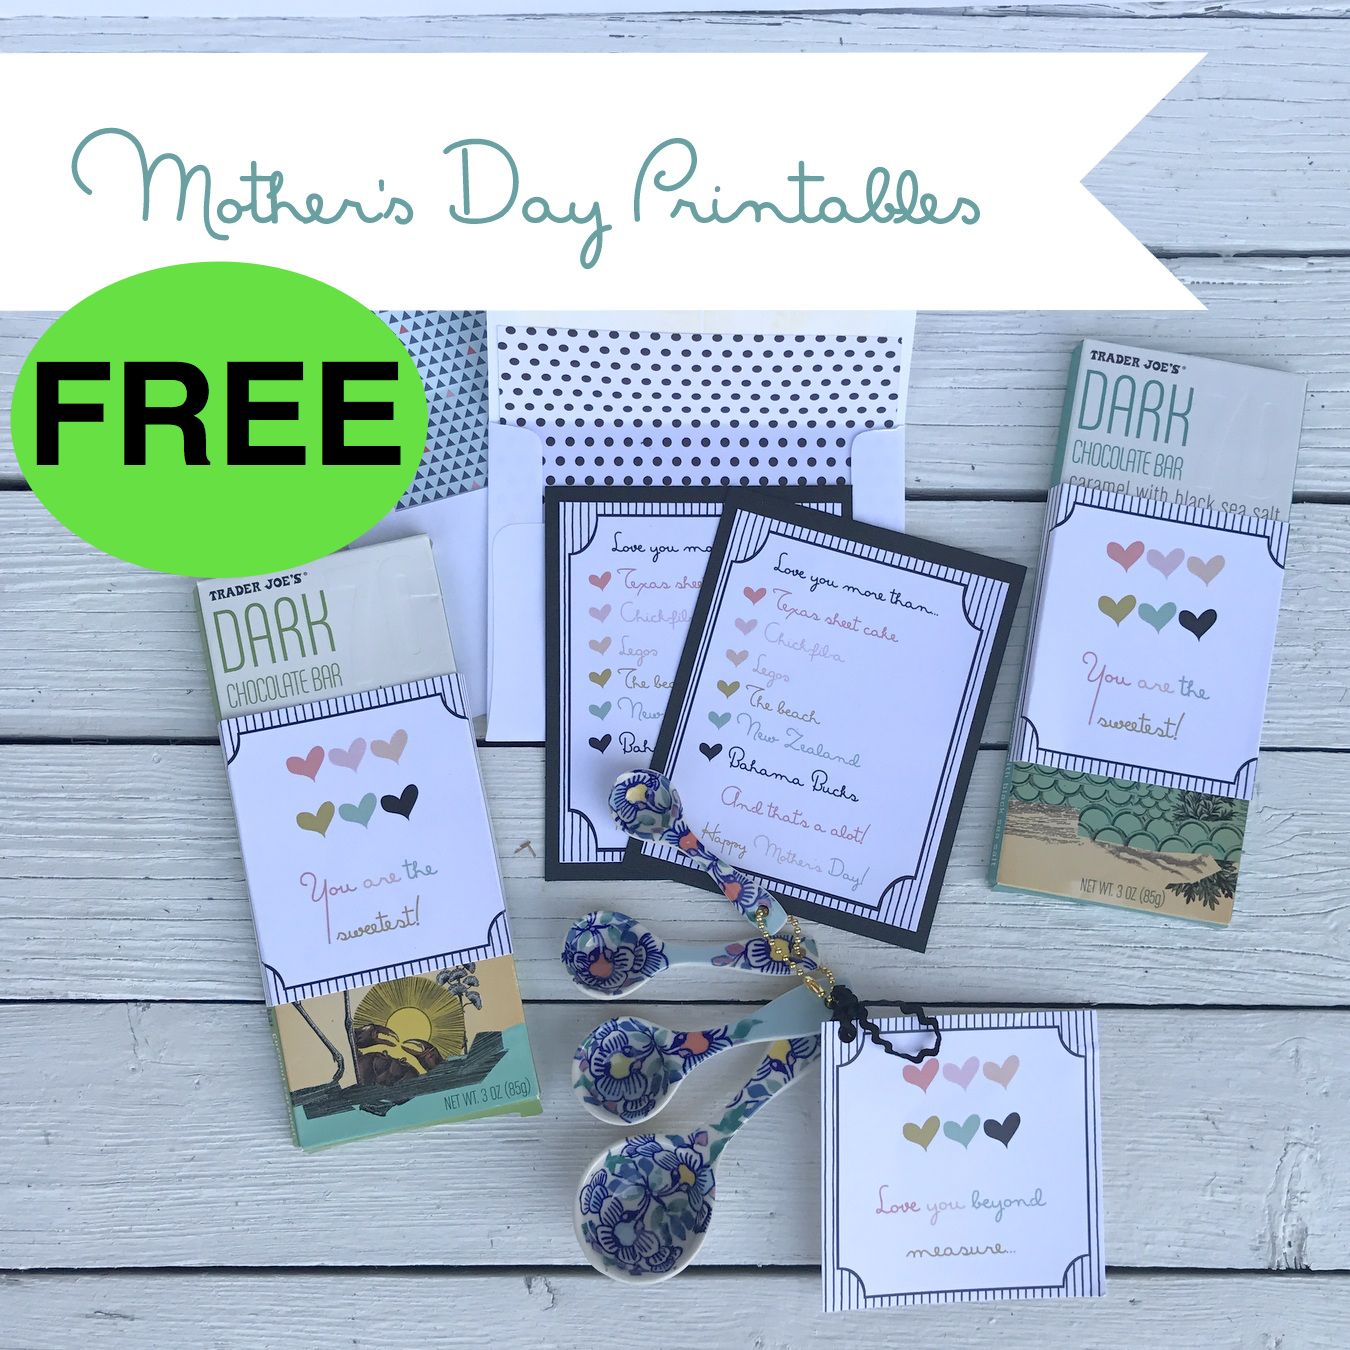 FREE Mother's Day Printables!